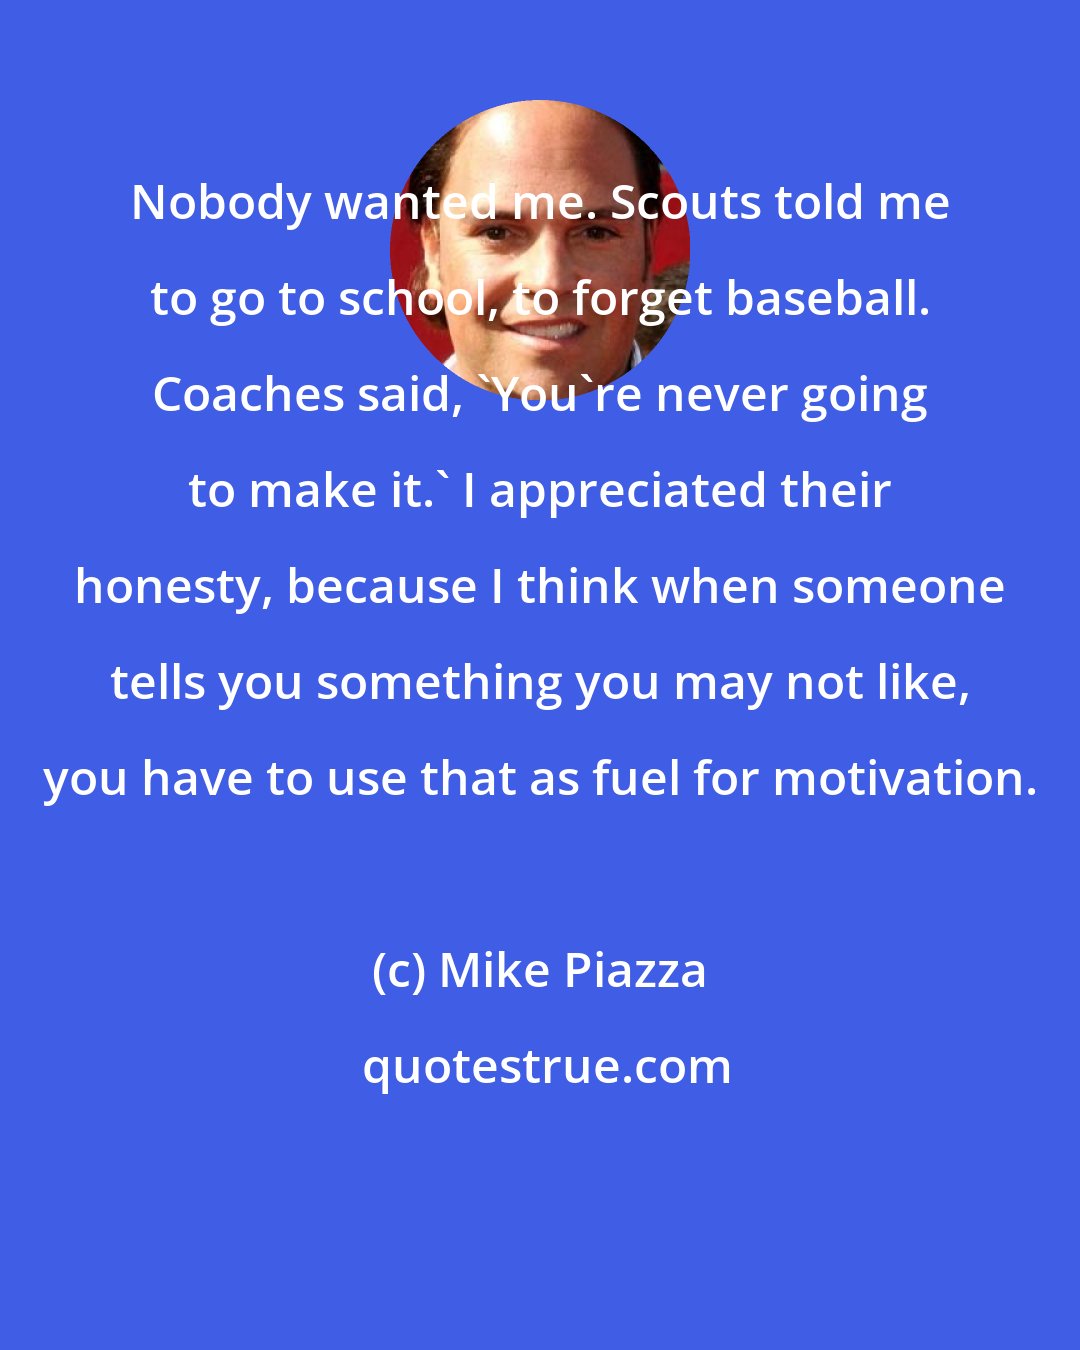 Mike Piazza: Nobody wanted me. Scouts told me to go to school, to forget baseball. Coaches said, 'You're never going to make it.' I appreciated their honesty, because I think when someone tells you something you may not like, you have to use that as fuel for motivation.